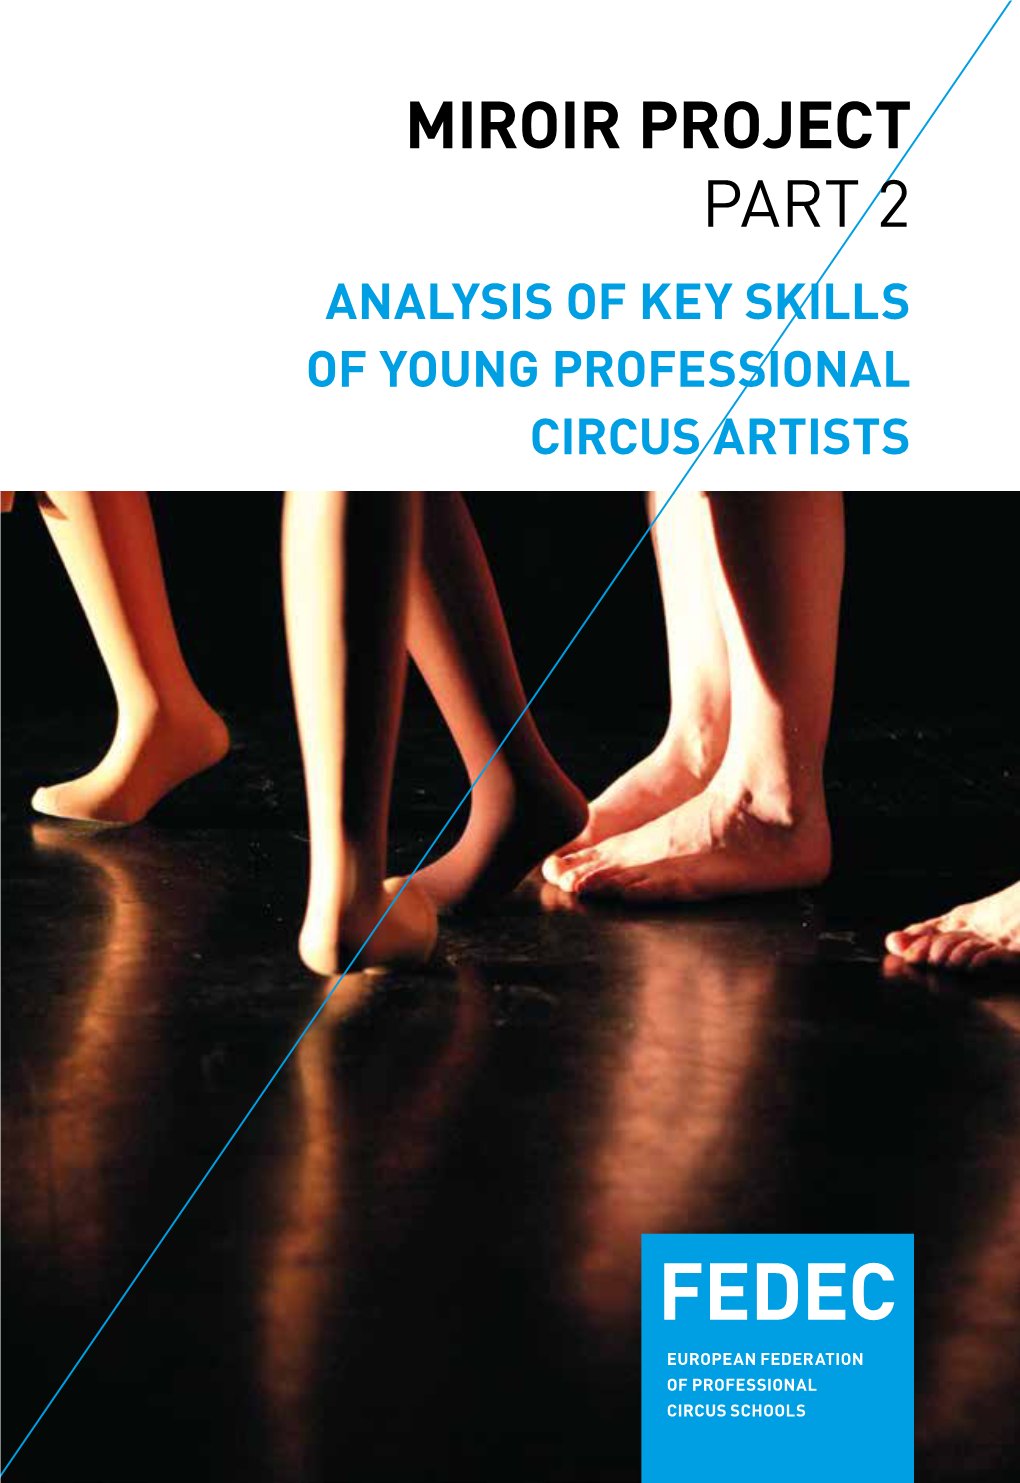 Miroir Project Part 2 Analysis of Key Skills of Young Professional Circus Artists